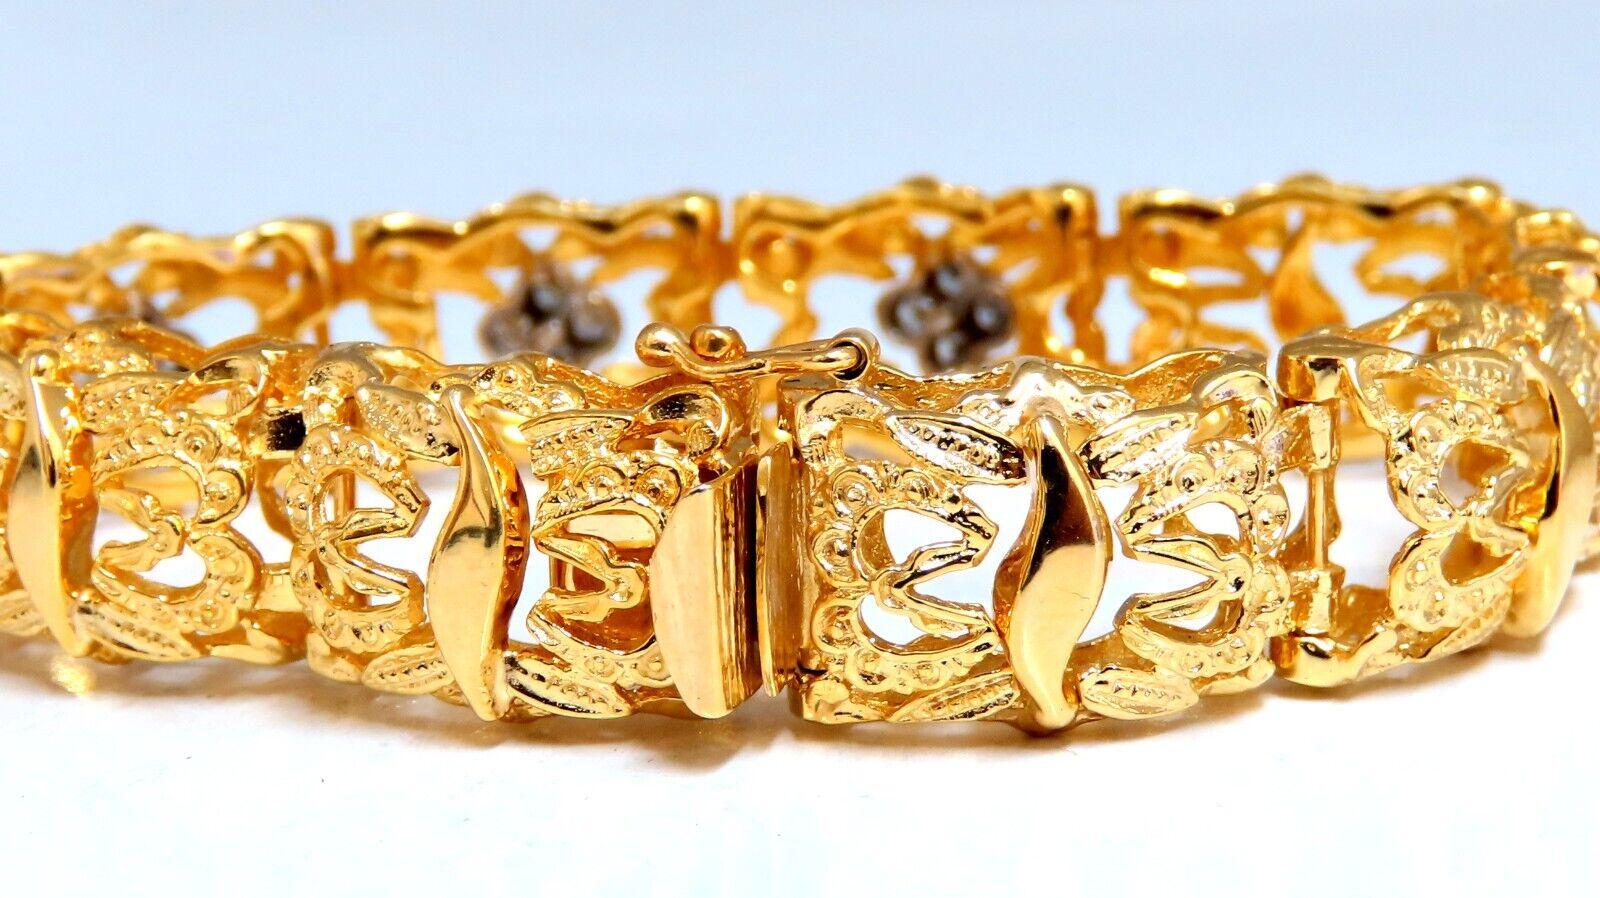 Ladies natural Diamond classic cluster Edwardian style deco bracelet.

.45ct Diamonds: H color, vs-2 si1 clarity.

14 karat yellow gold 30 grams

12 Diamond Count

Bracelet measures 12mm wide

Comfortable pressure clasp and safety snap.



$7000